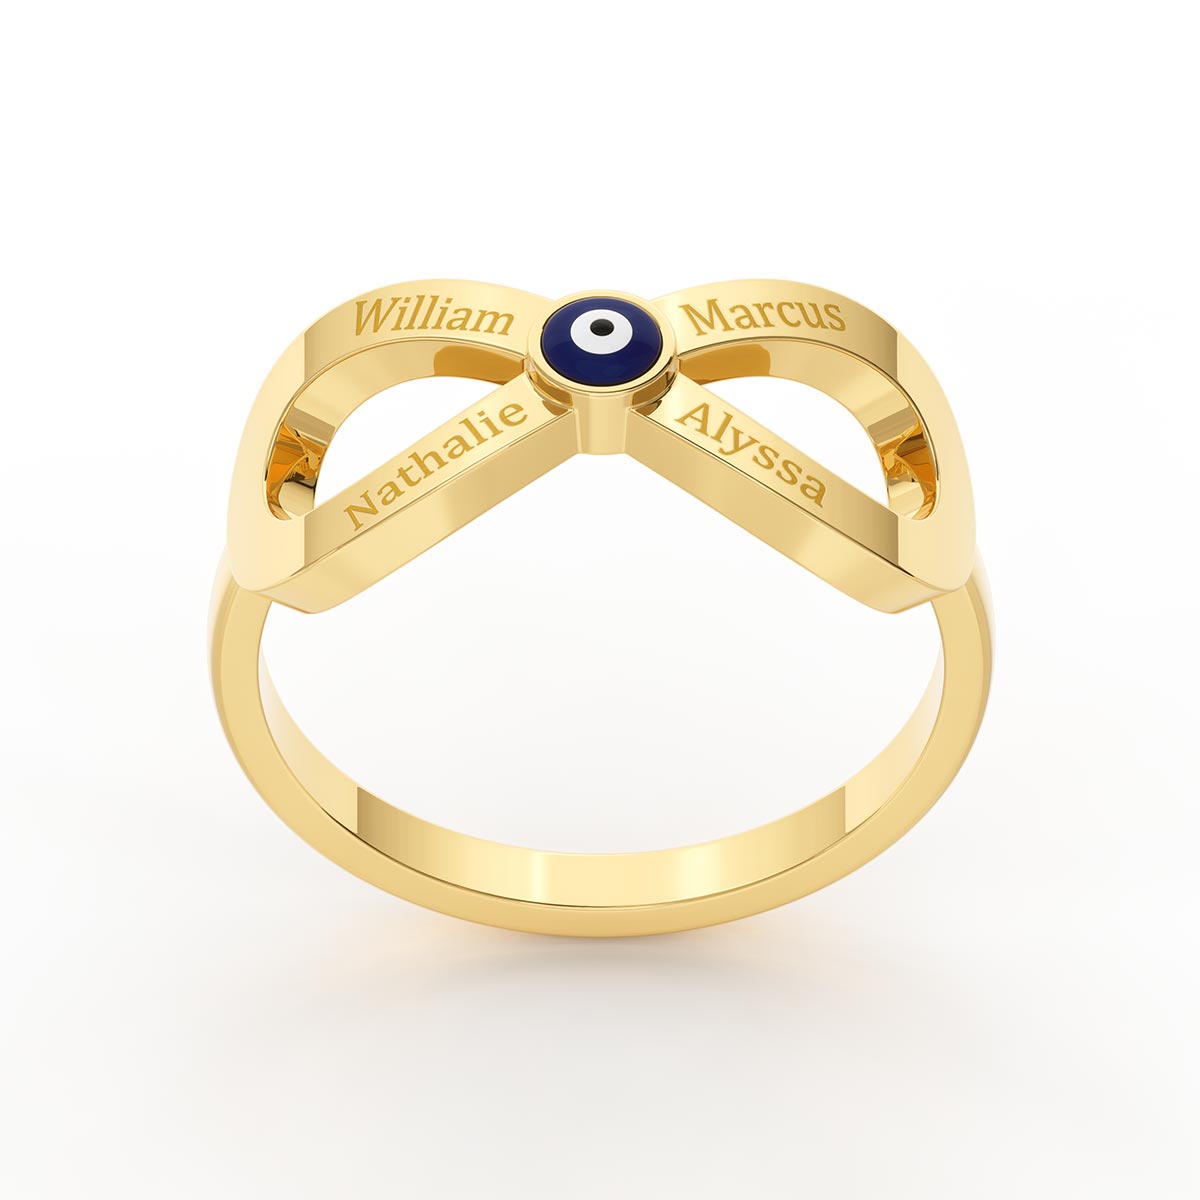 4 Name Engraved Ring with Evil Eye